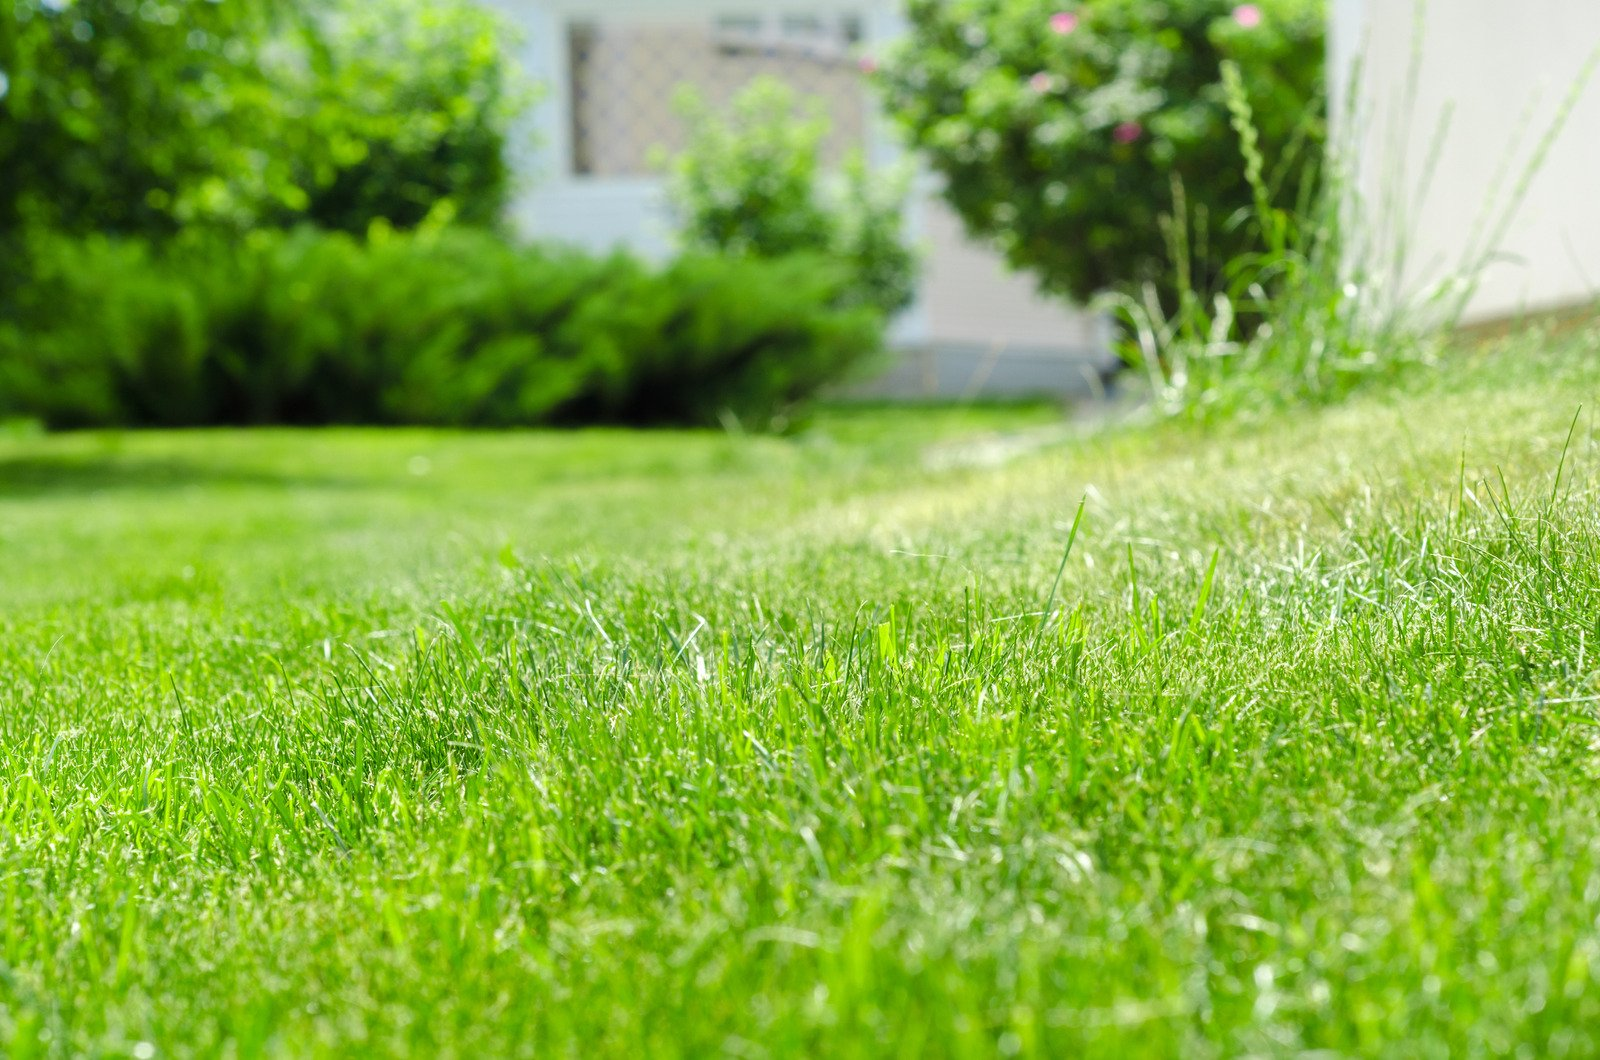 A fertlized lawn actviely growing